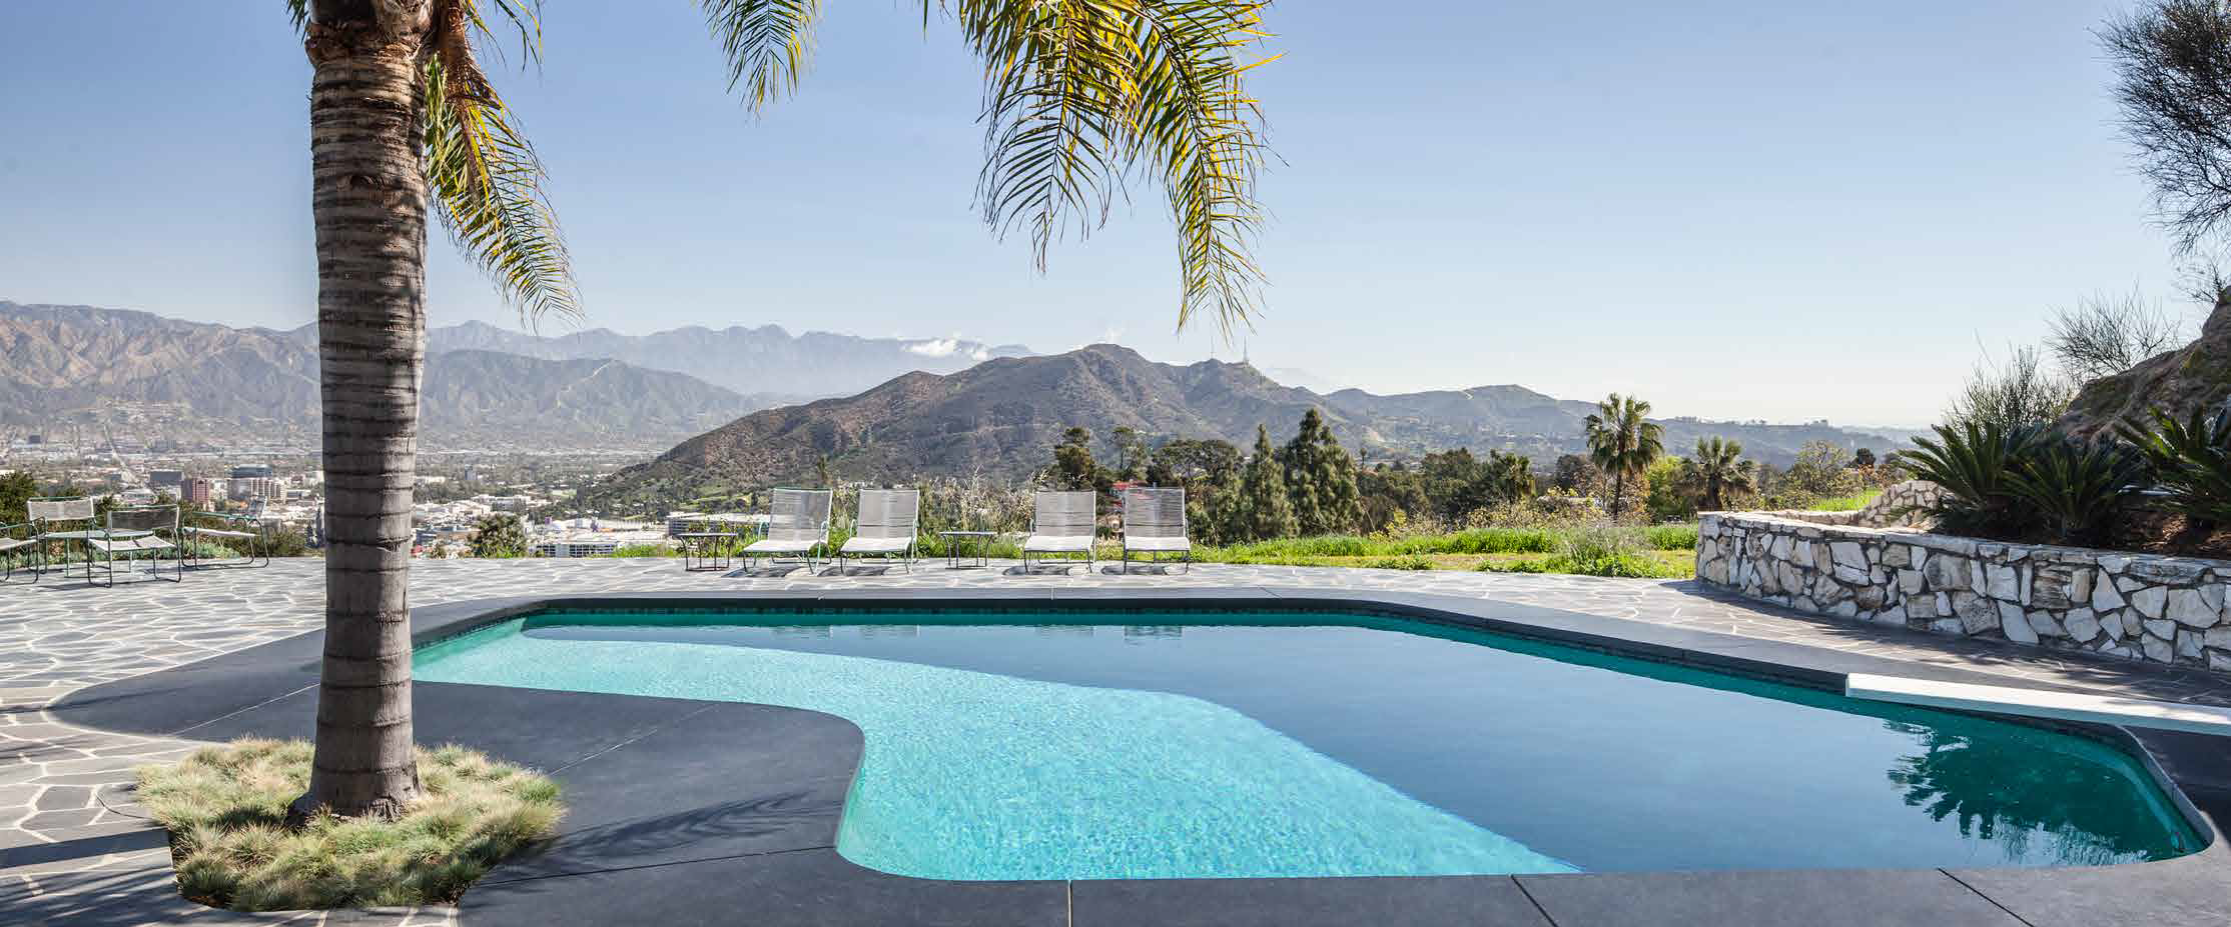 The book take readers on a tour of backyards and patios of celebrities and luminaries like Diane Keaton, Cher, Bunny Williams, Carolyne Roehm, and Frank Lloyd Wright in Southern California, Mexico, Palm Springs, and Connecticut.